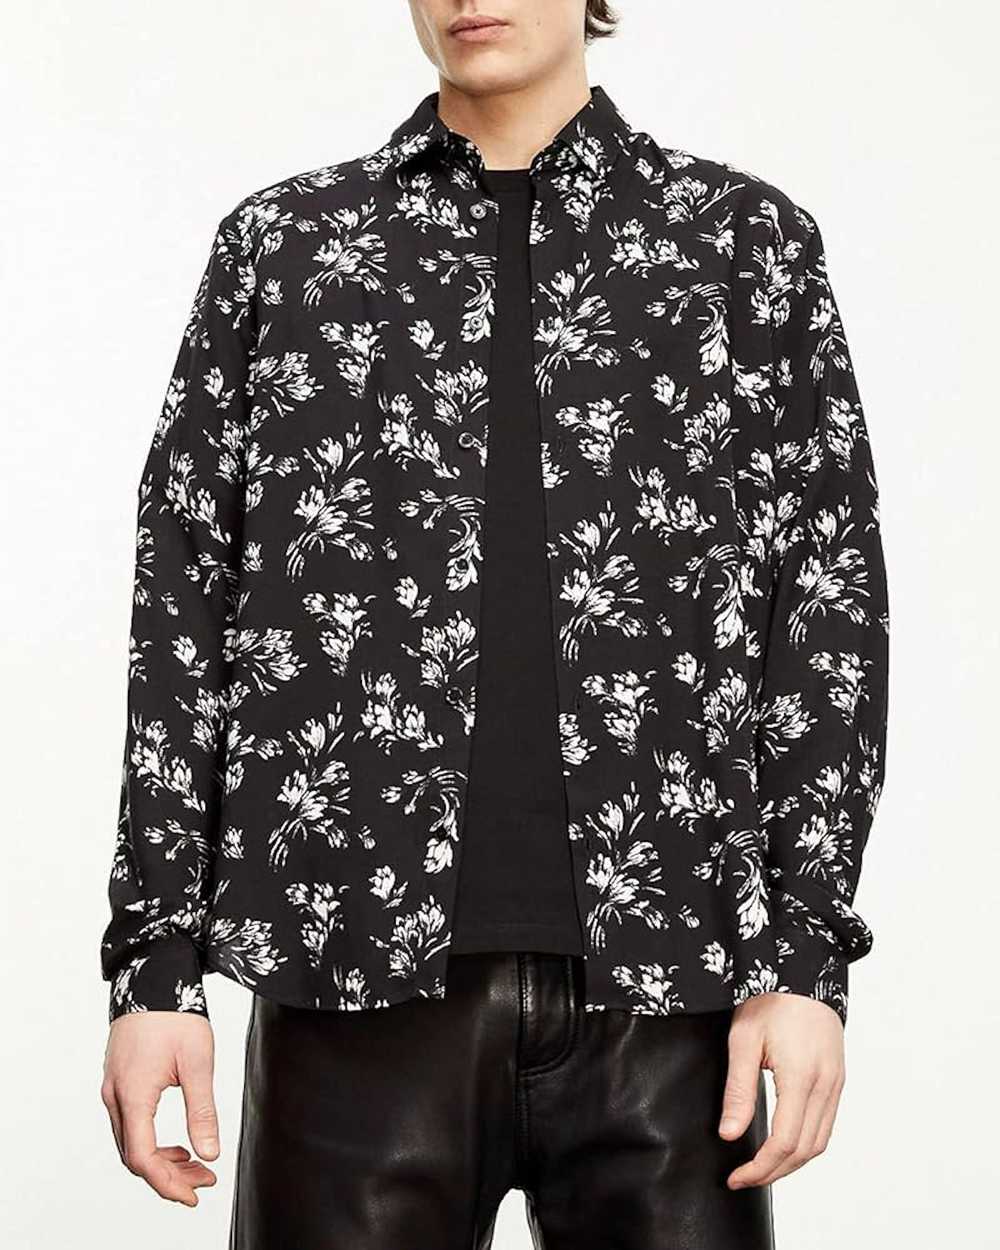 The Kooples The Kooples Black And White Floral Pr… - image 2